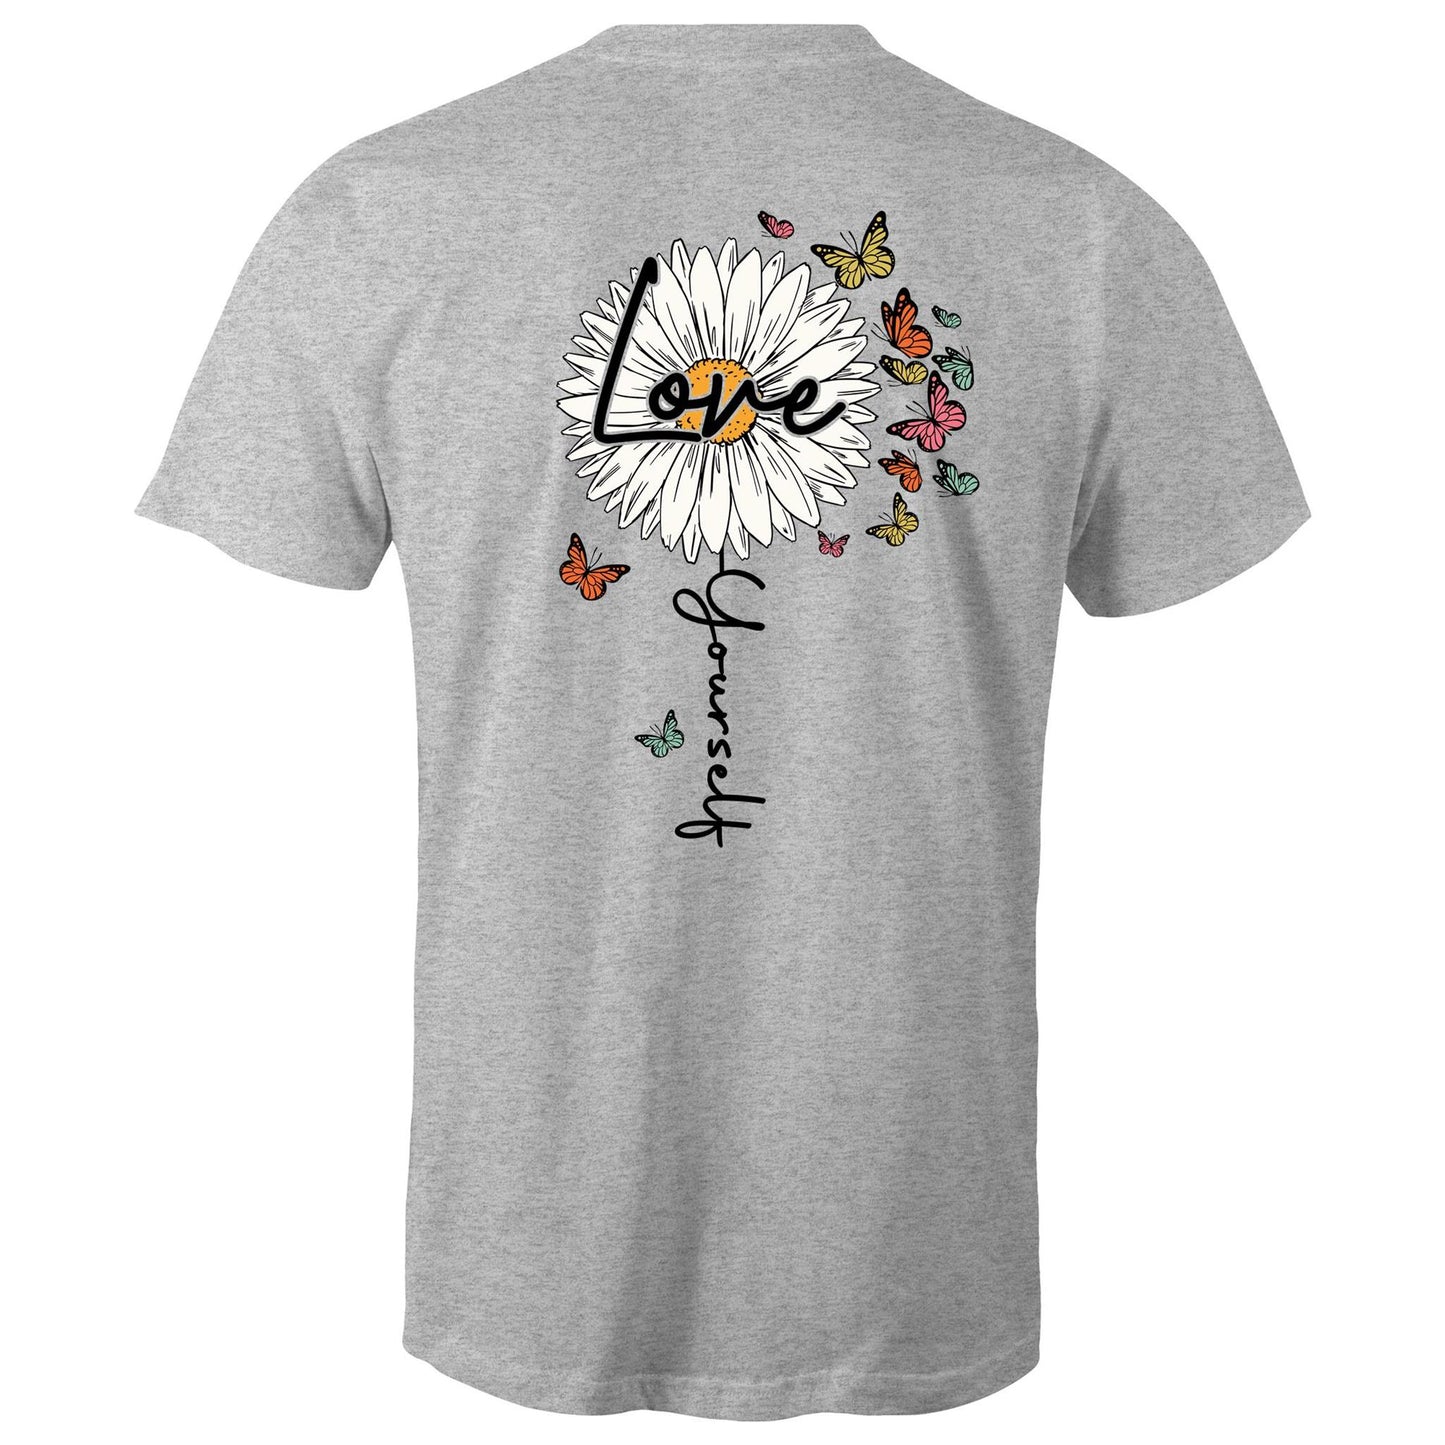 Mens T-Shirt - Love Yourself